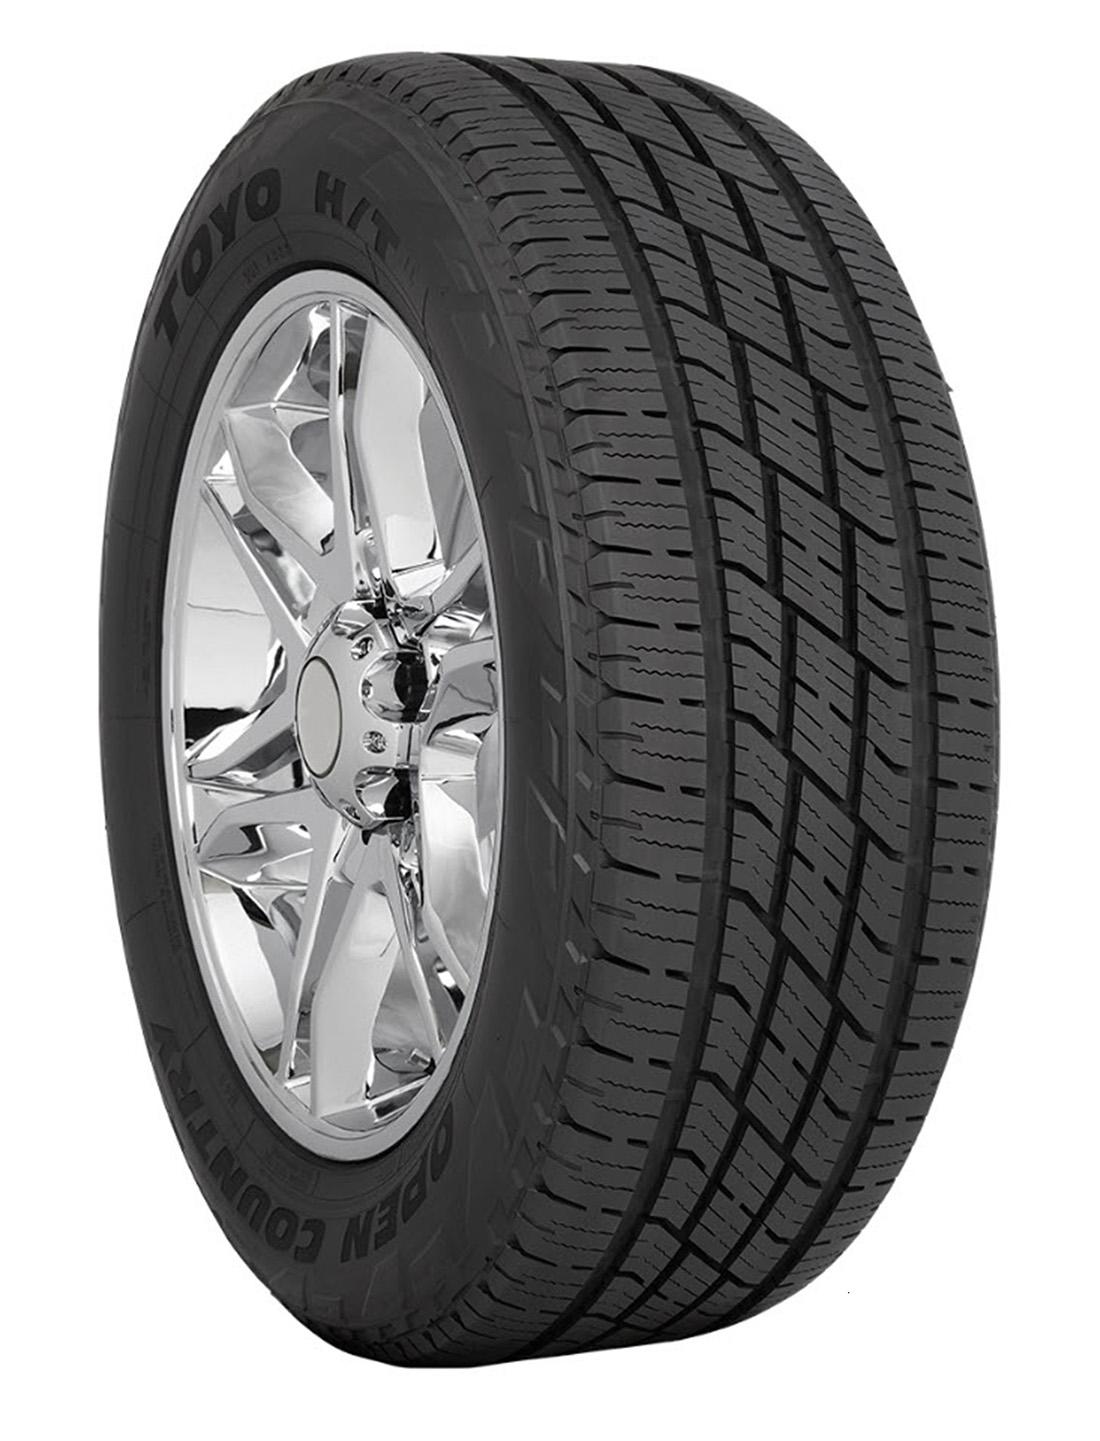 Toyo - PROXES HT  NW  305/35R24